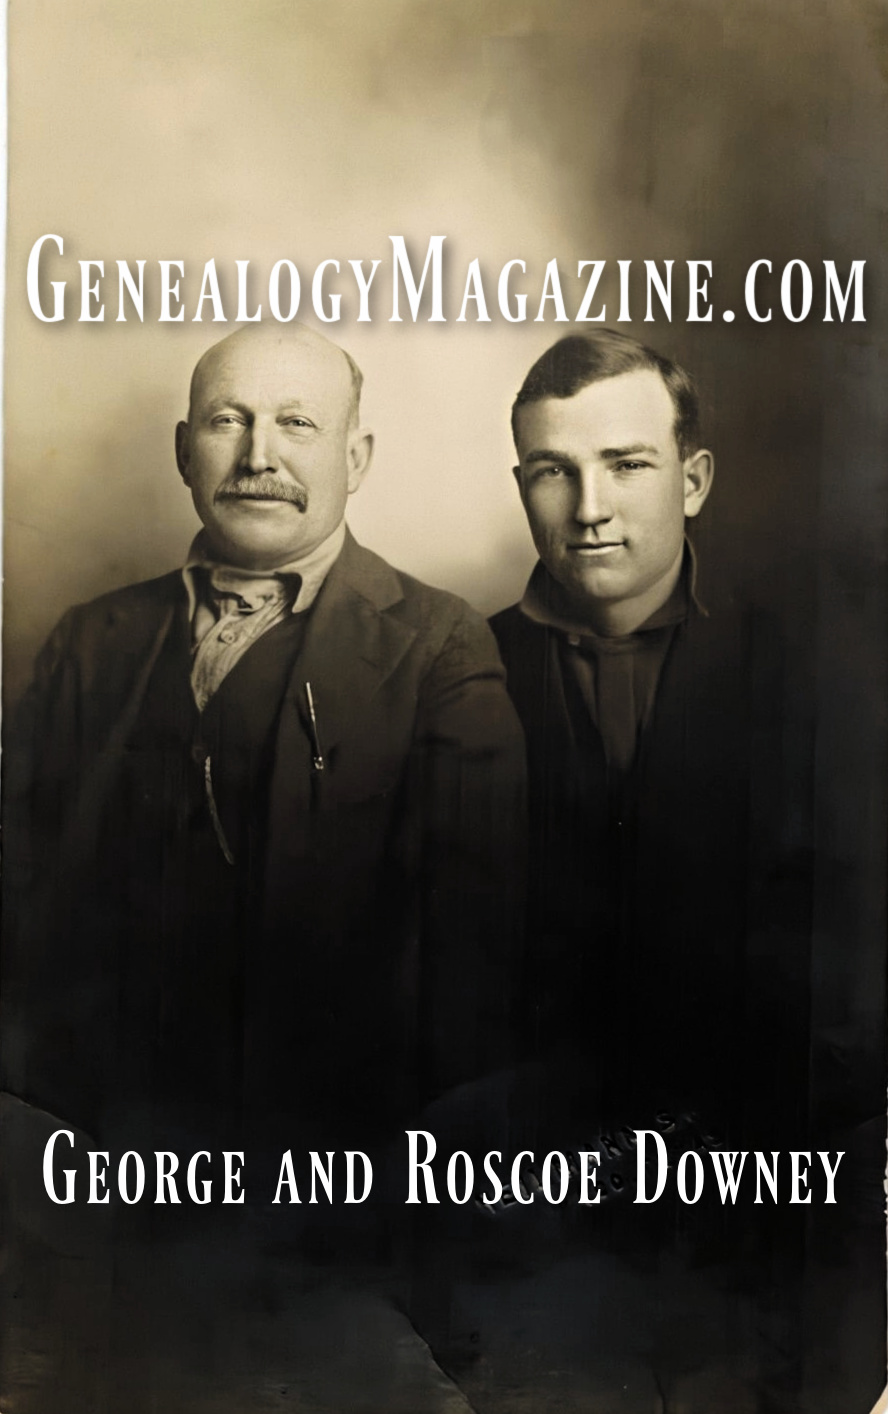 George and Roscoe Downey